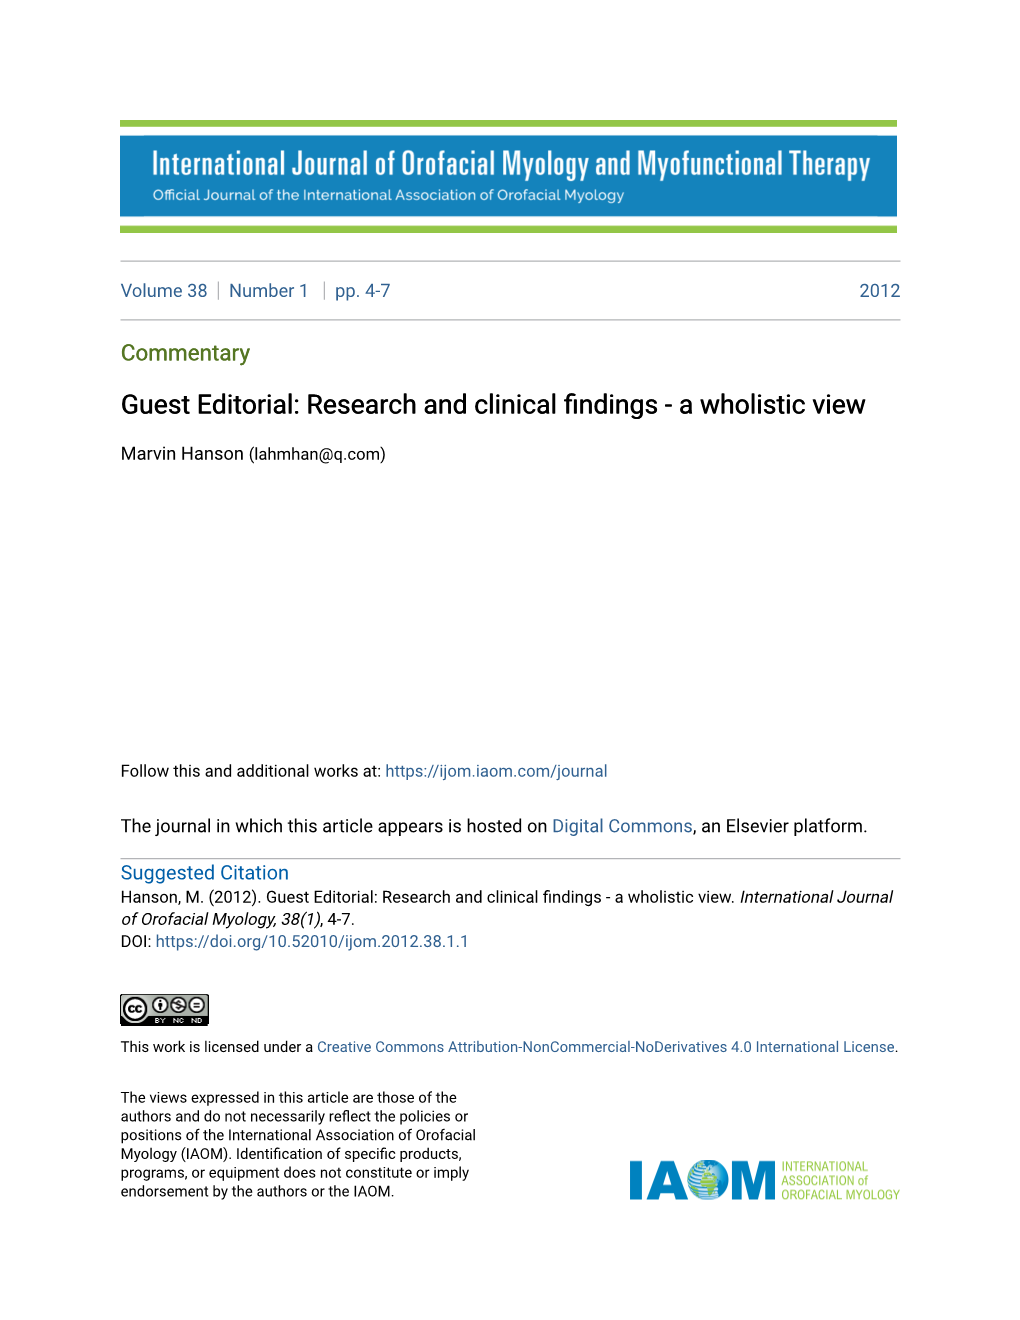 Guest Editorial: Research and Clinical Findings - a Wholistic View